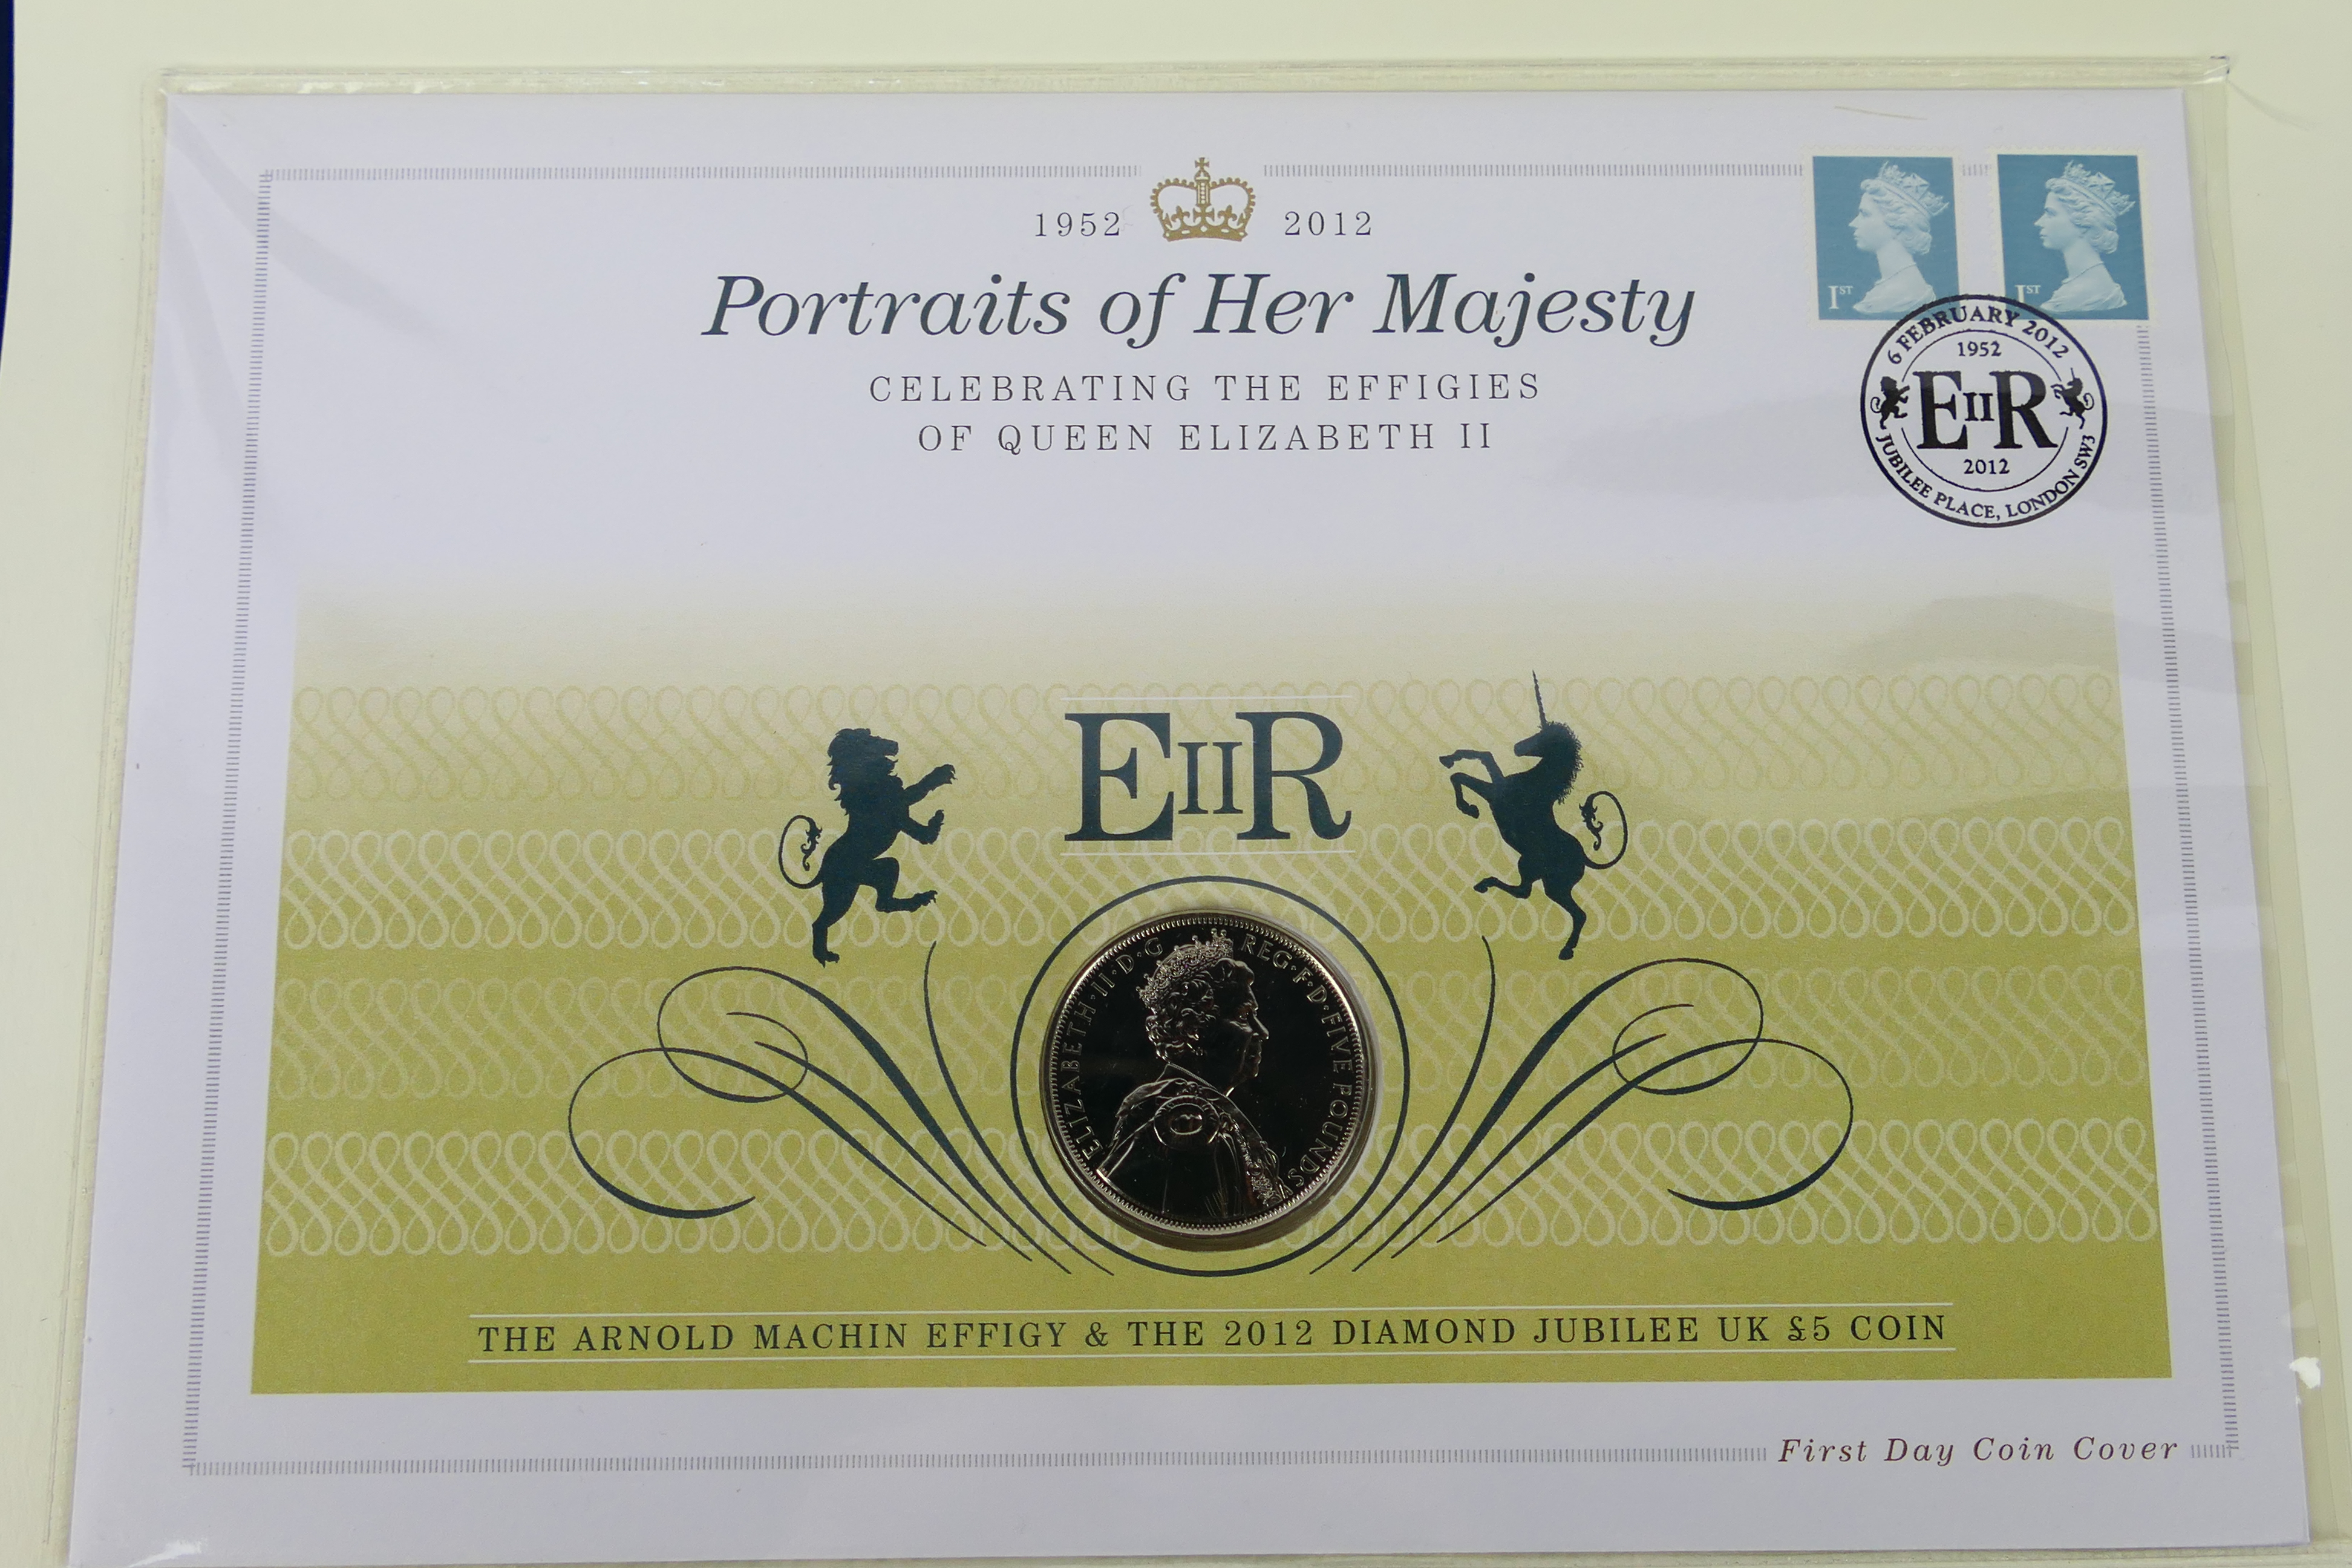 A limited edition Westminster Portraits Of Her Majesty First Day Coin And Banknote Cover Collection, - Image 10 of 10